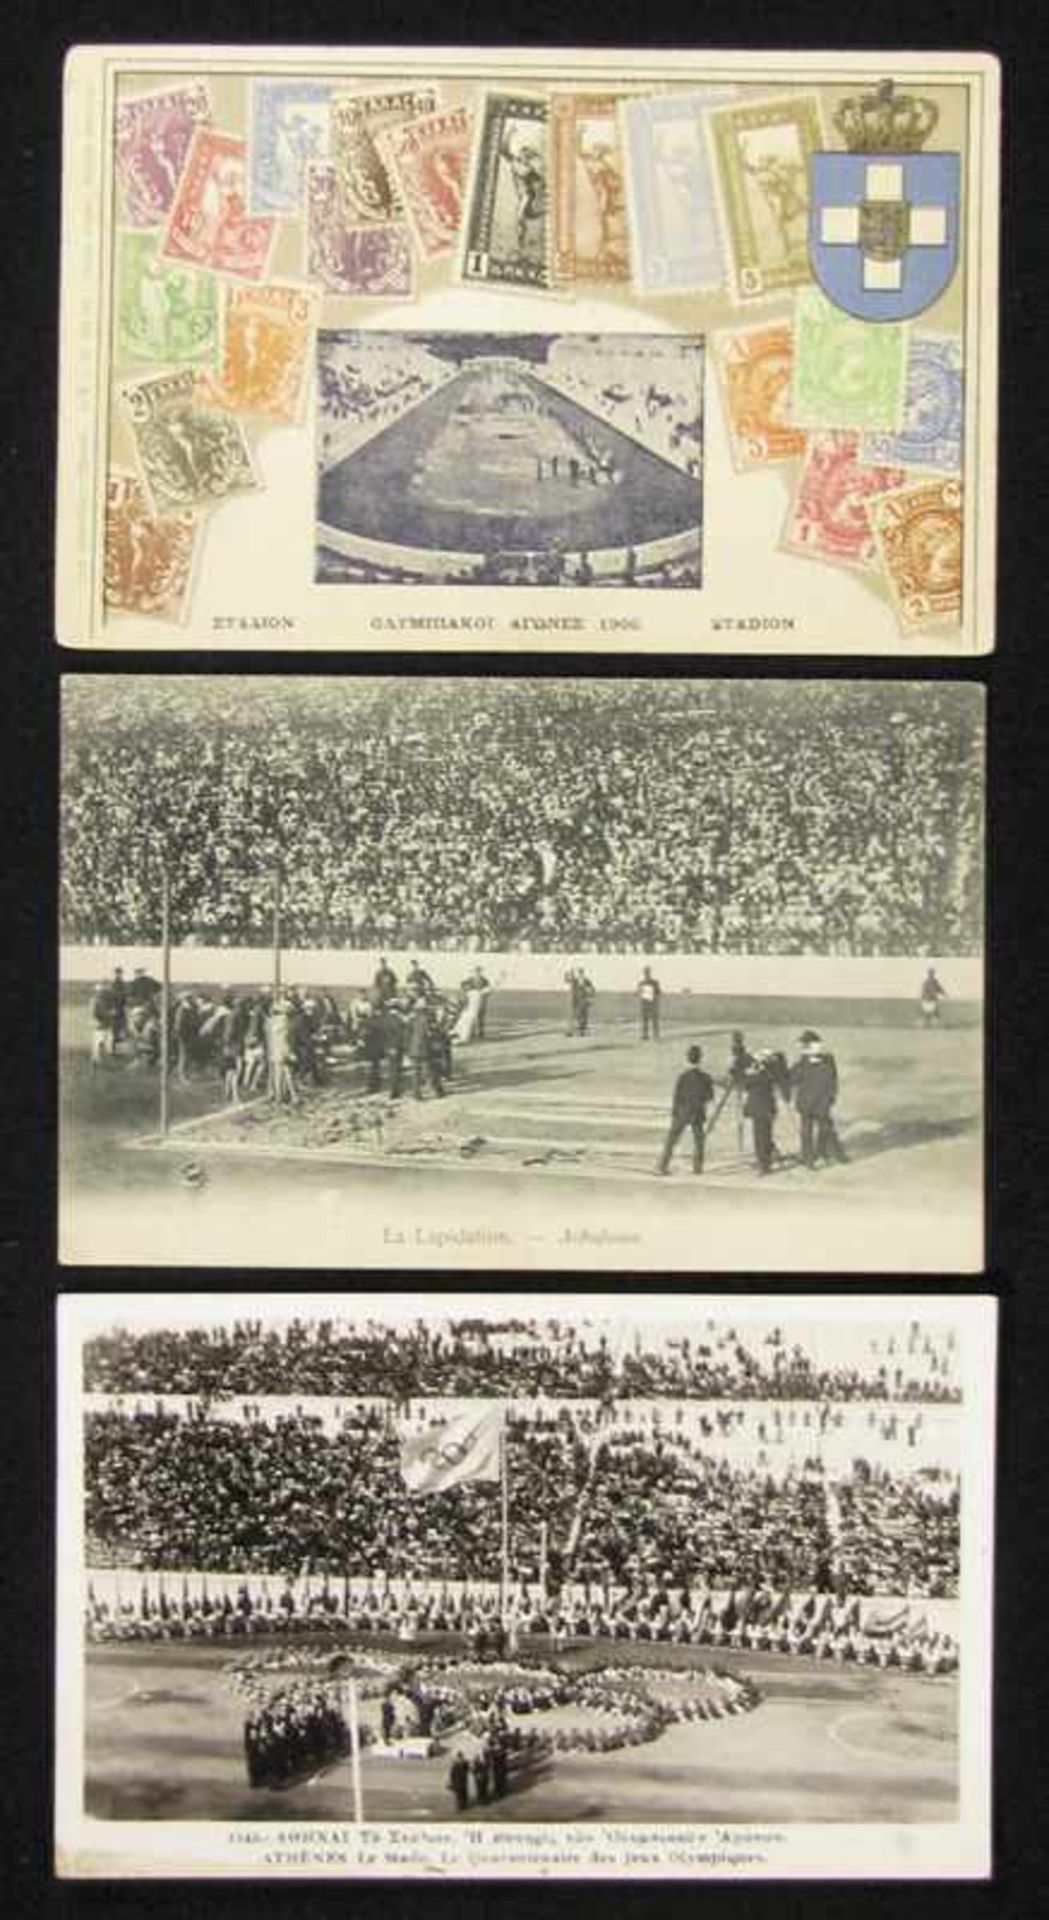 Olympic Games 1906. 3 postcards - Three postcards from the Olympic Games in Athens 1906, each 14 x 9